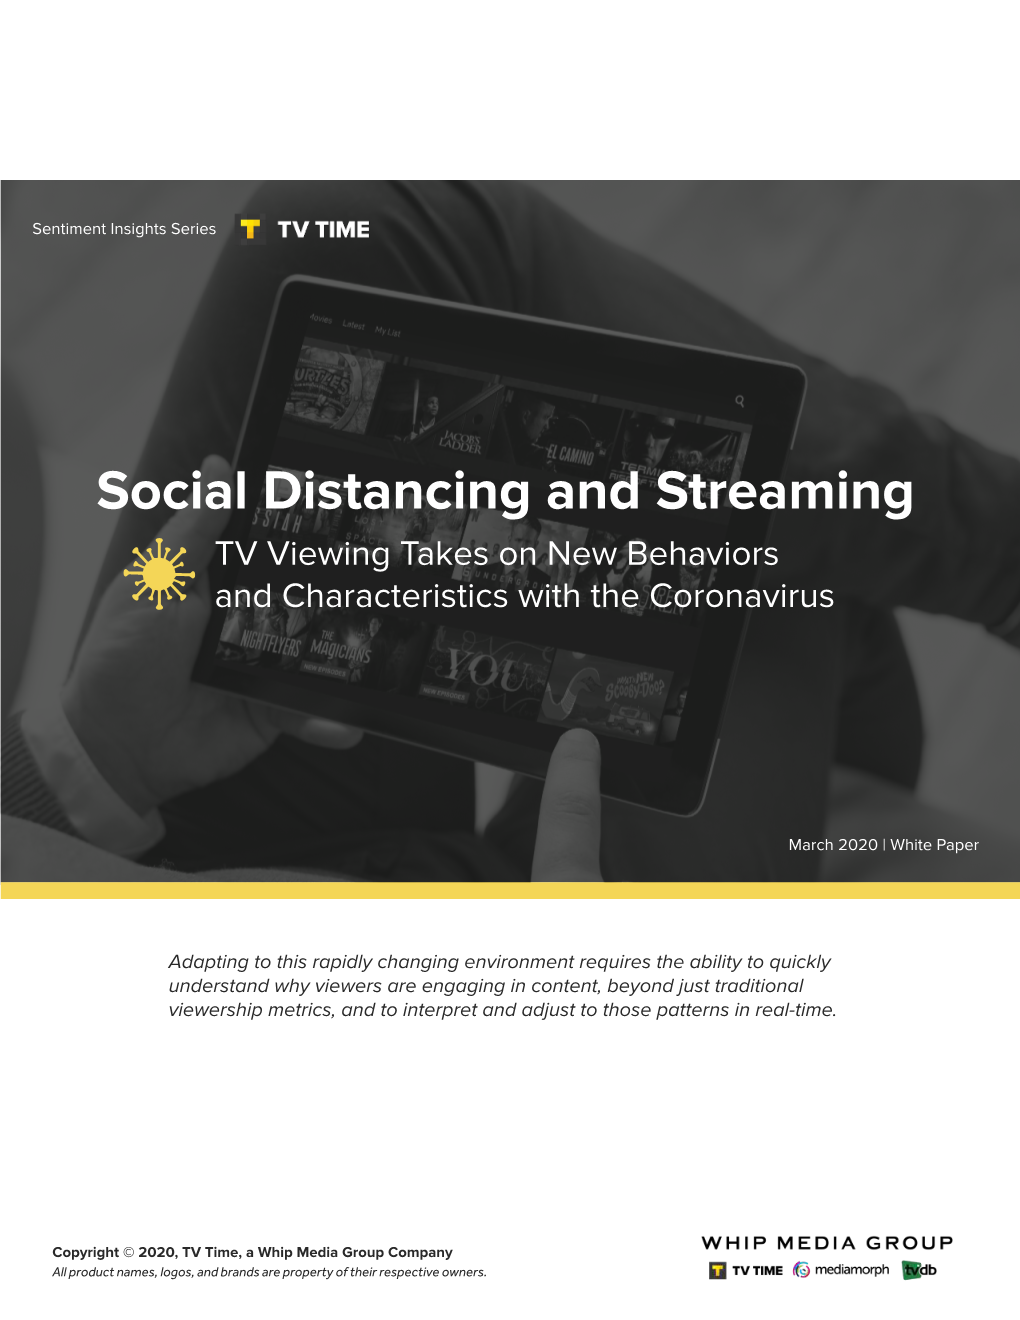 Social Distancing and Streaming TV Viewing Takes on New Behaviors and Characteristics with the Coronavirus